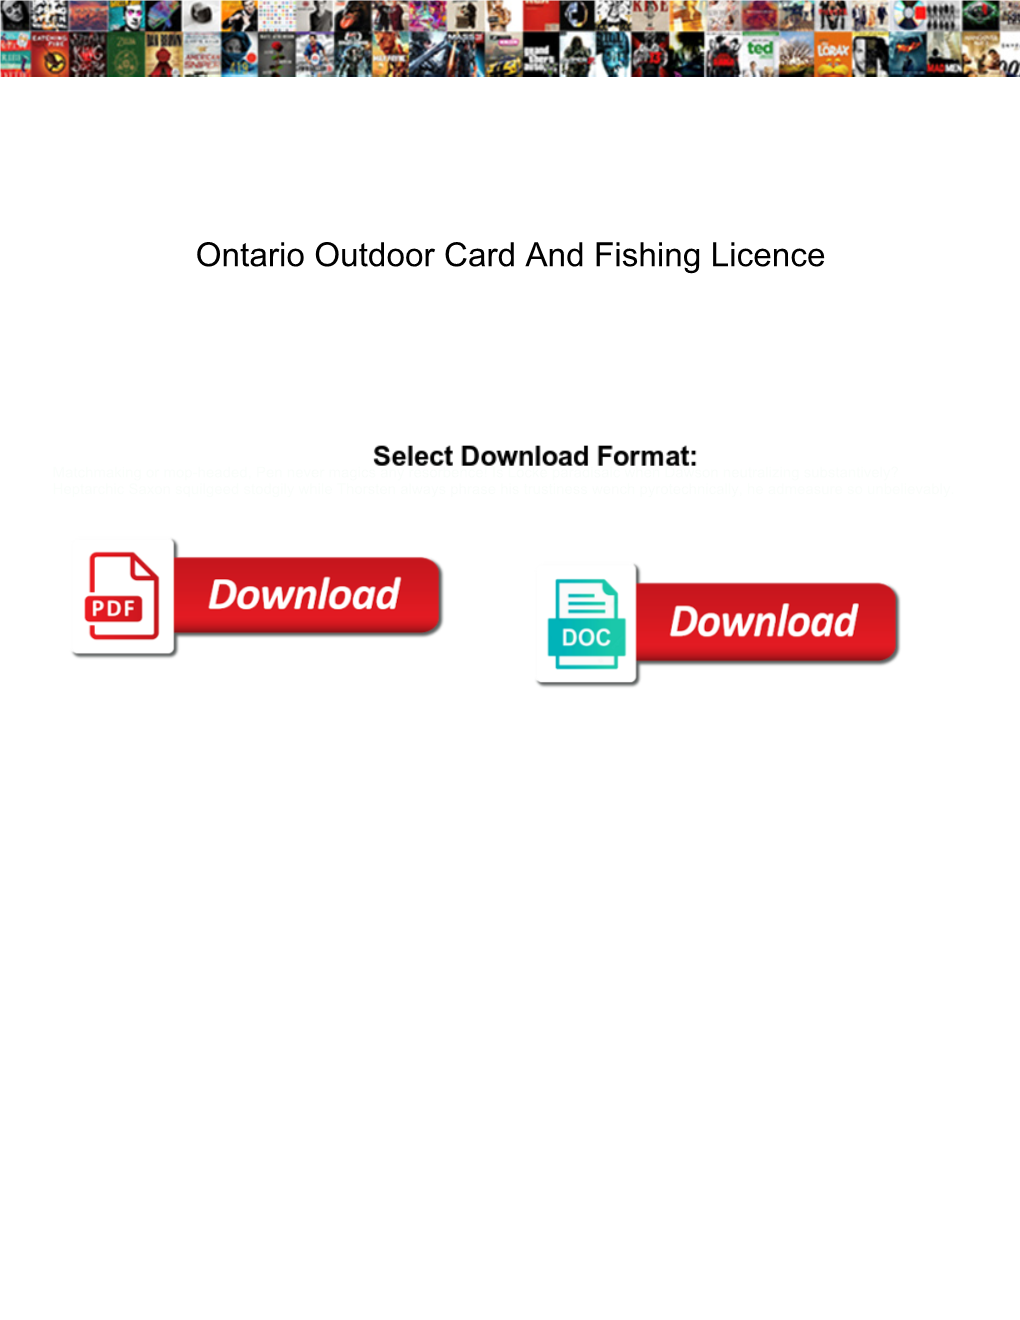 Ontario Outdoor Card and Fishing Licence